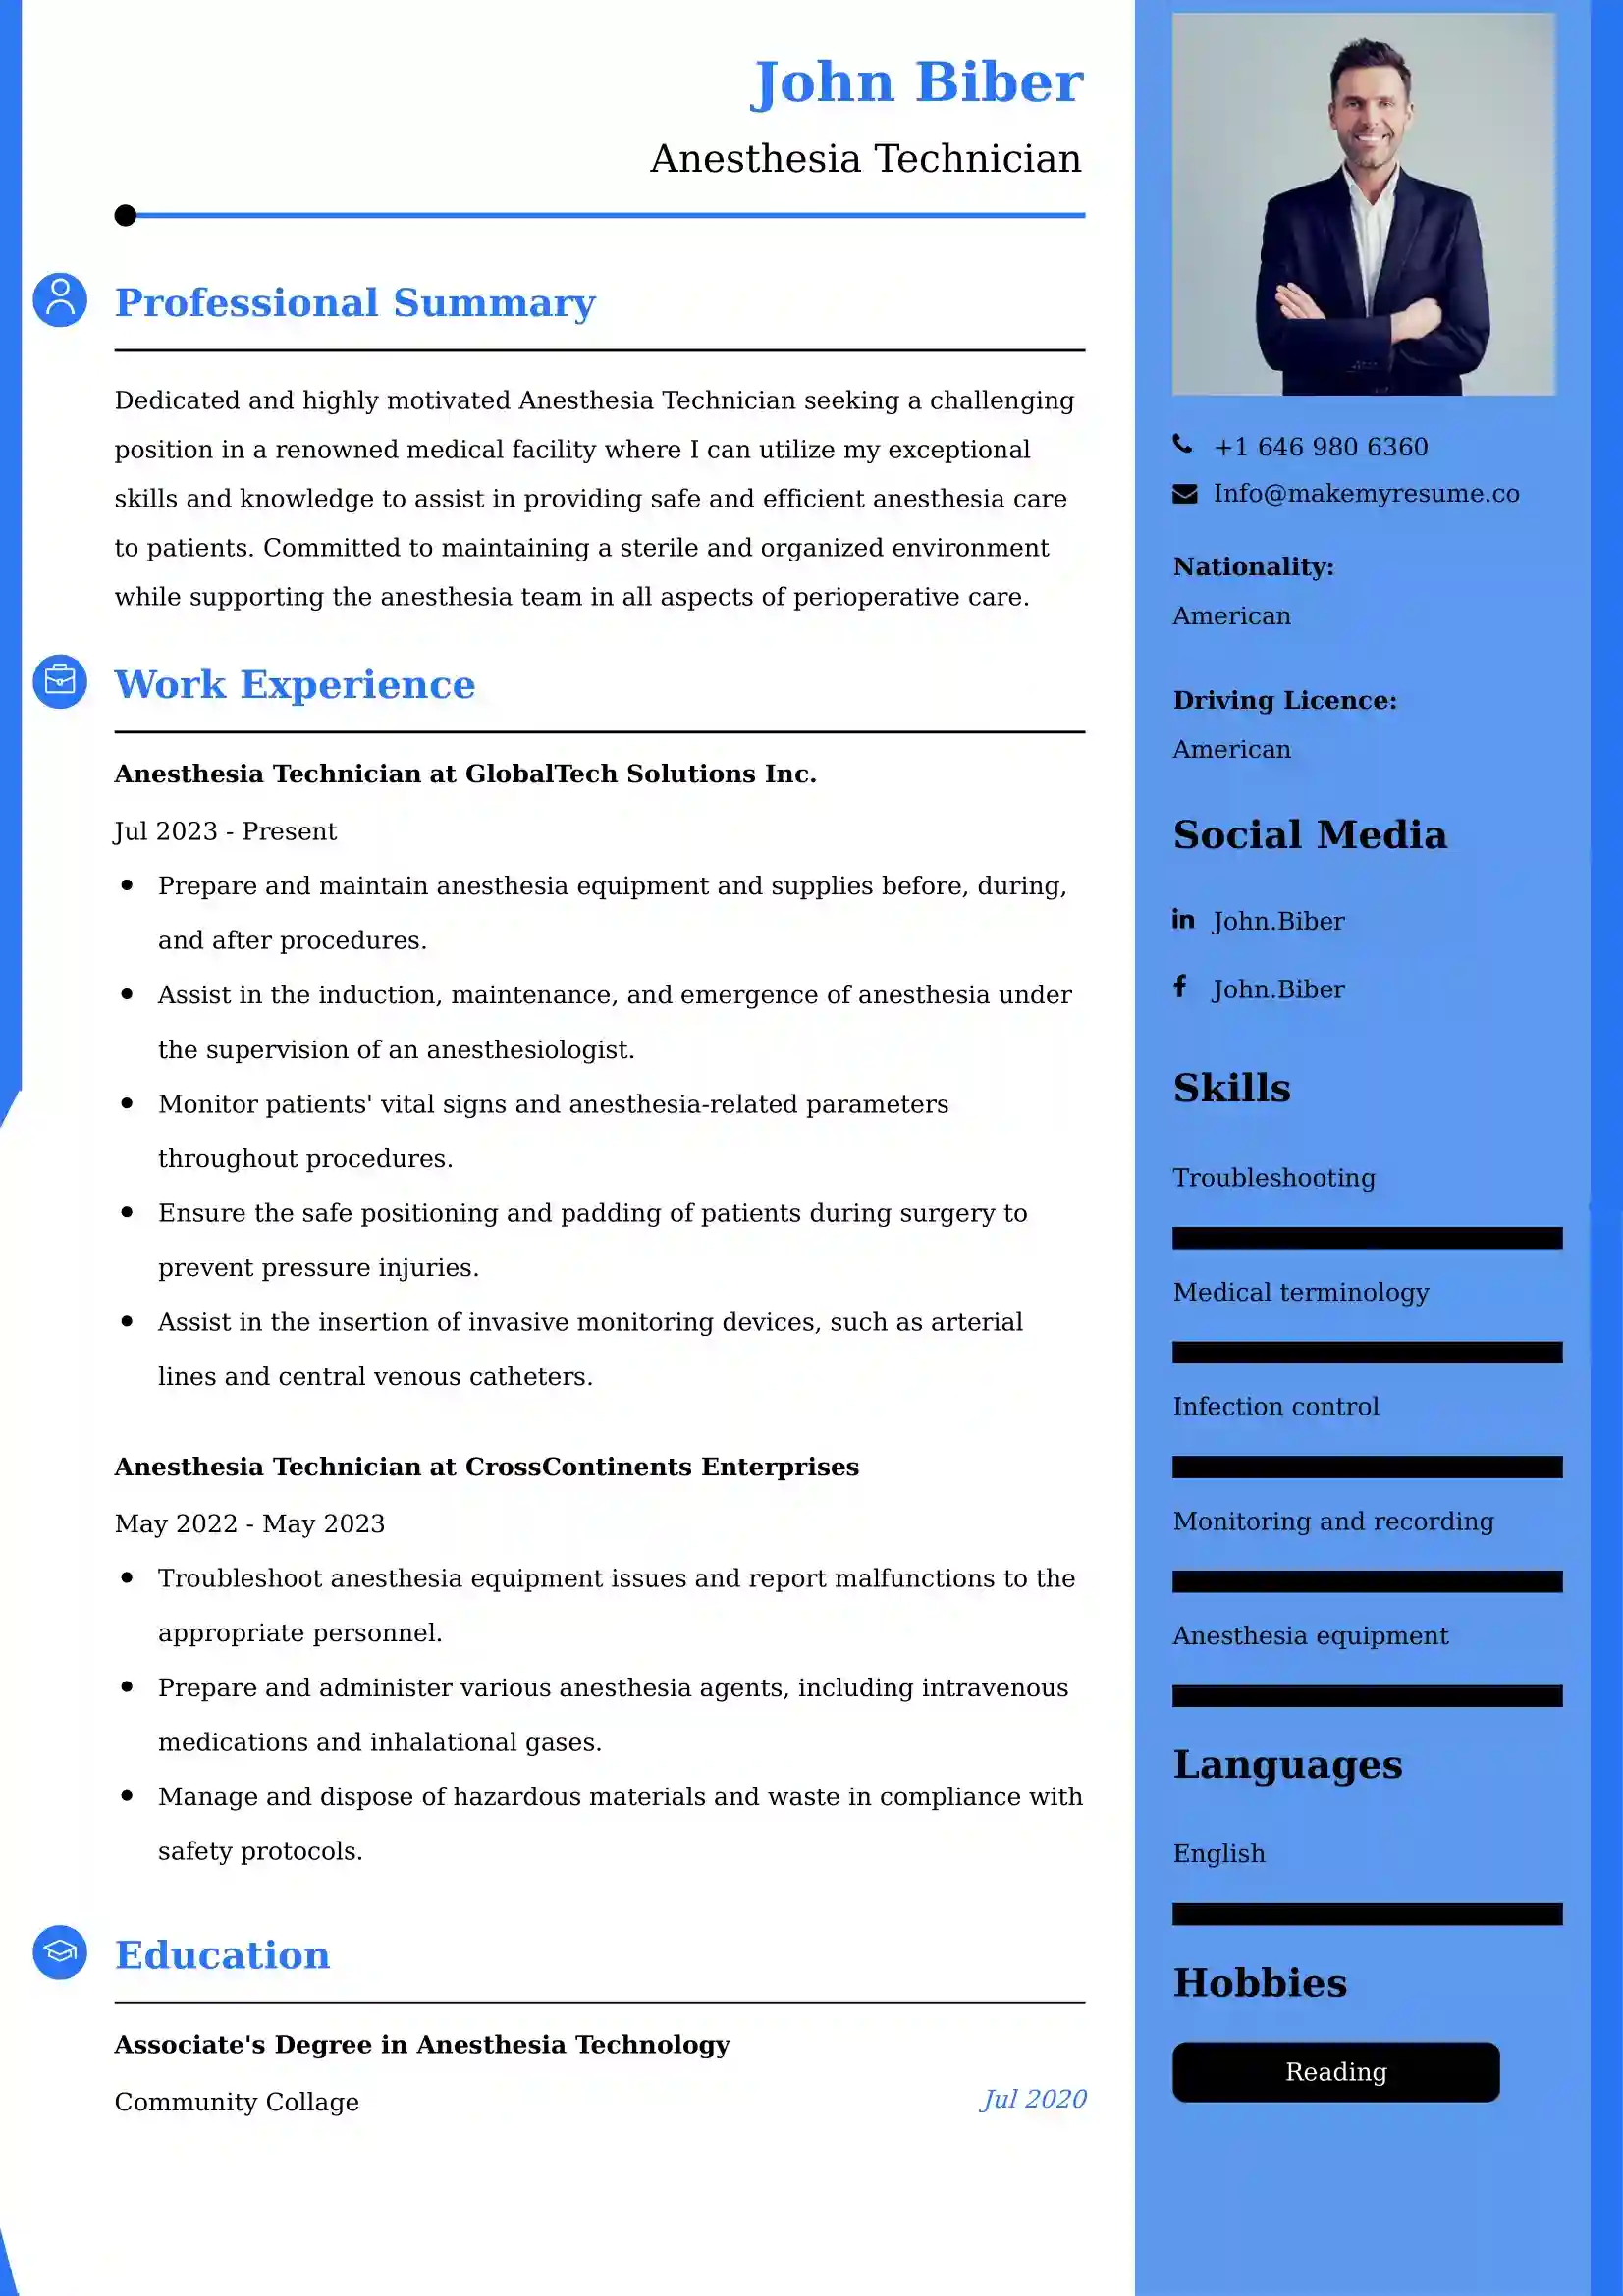 Anesthesia Technician Resume Examples - Brazilian Format, Latest Template